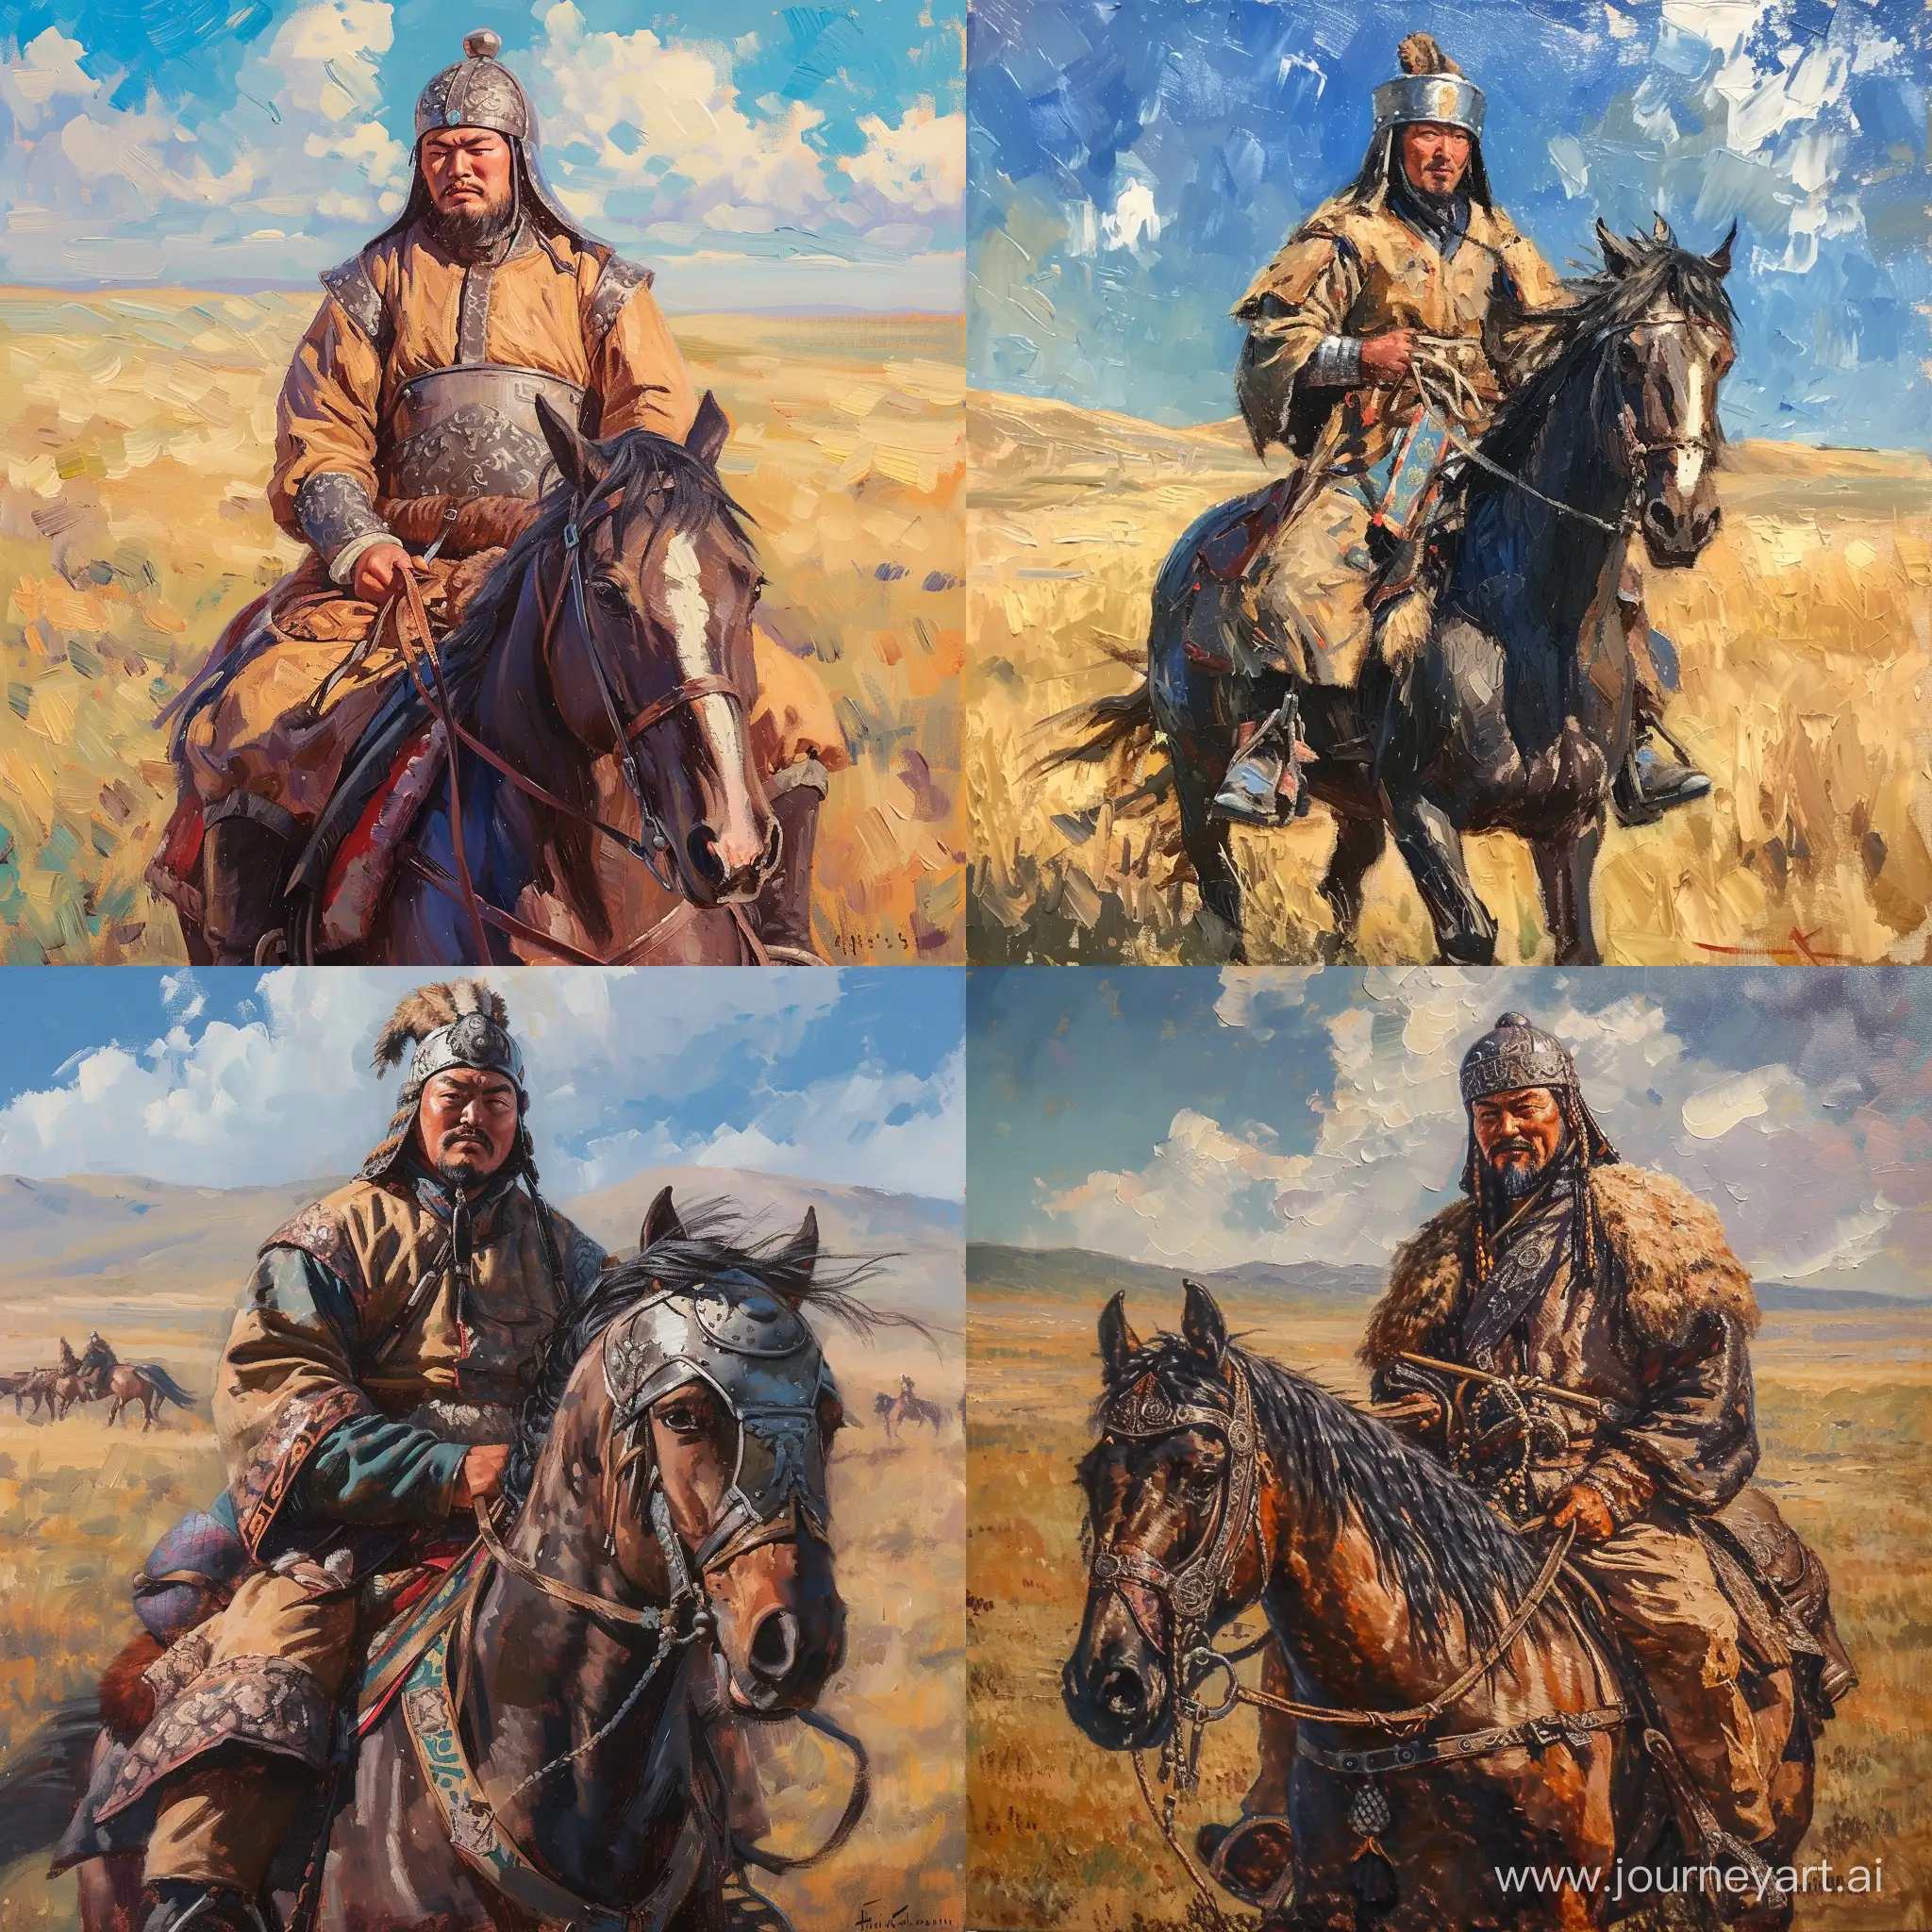 Genghis-Khan-Riding-His-Horse-Across-the-Vast-Mongolian-Steppe-Traditional-Attire-Depicted-in-Dynamic-Oil-Painting